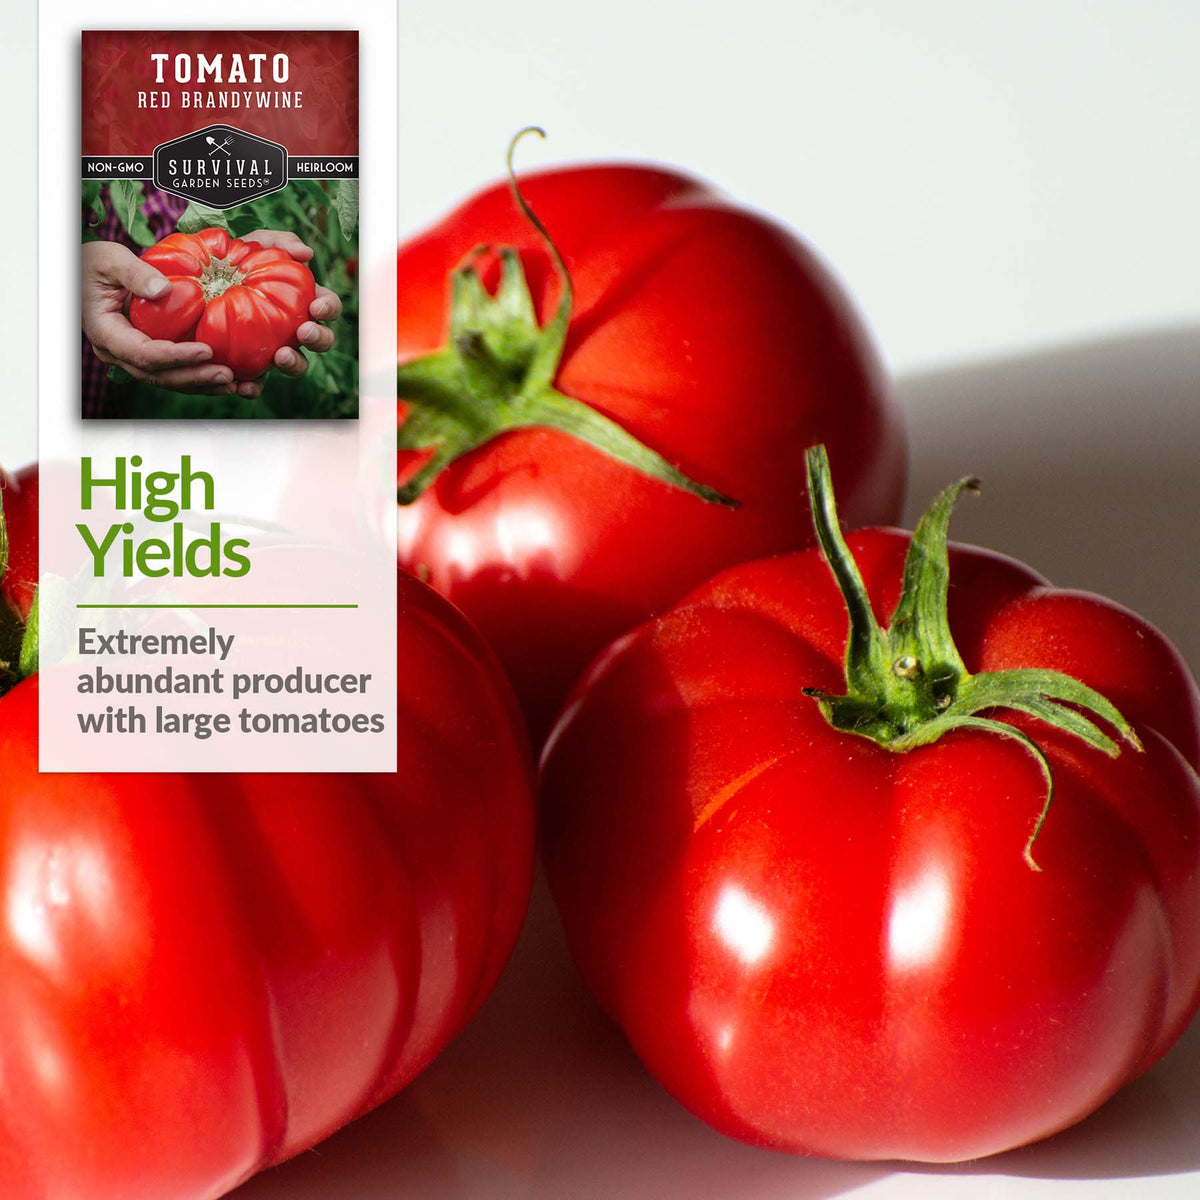 Brandywine Red tomato plants are an extremely abundant producer with large tomatoes